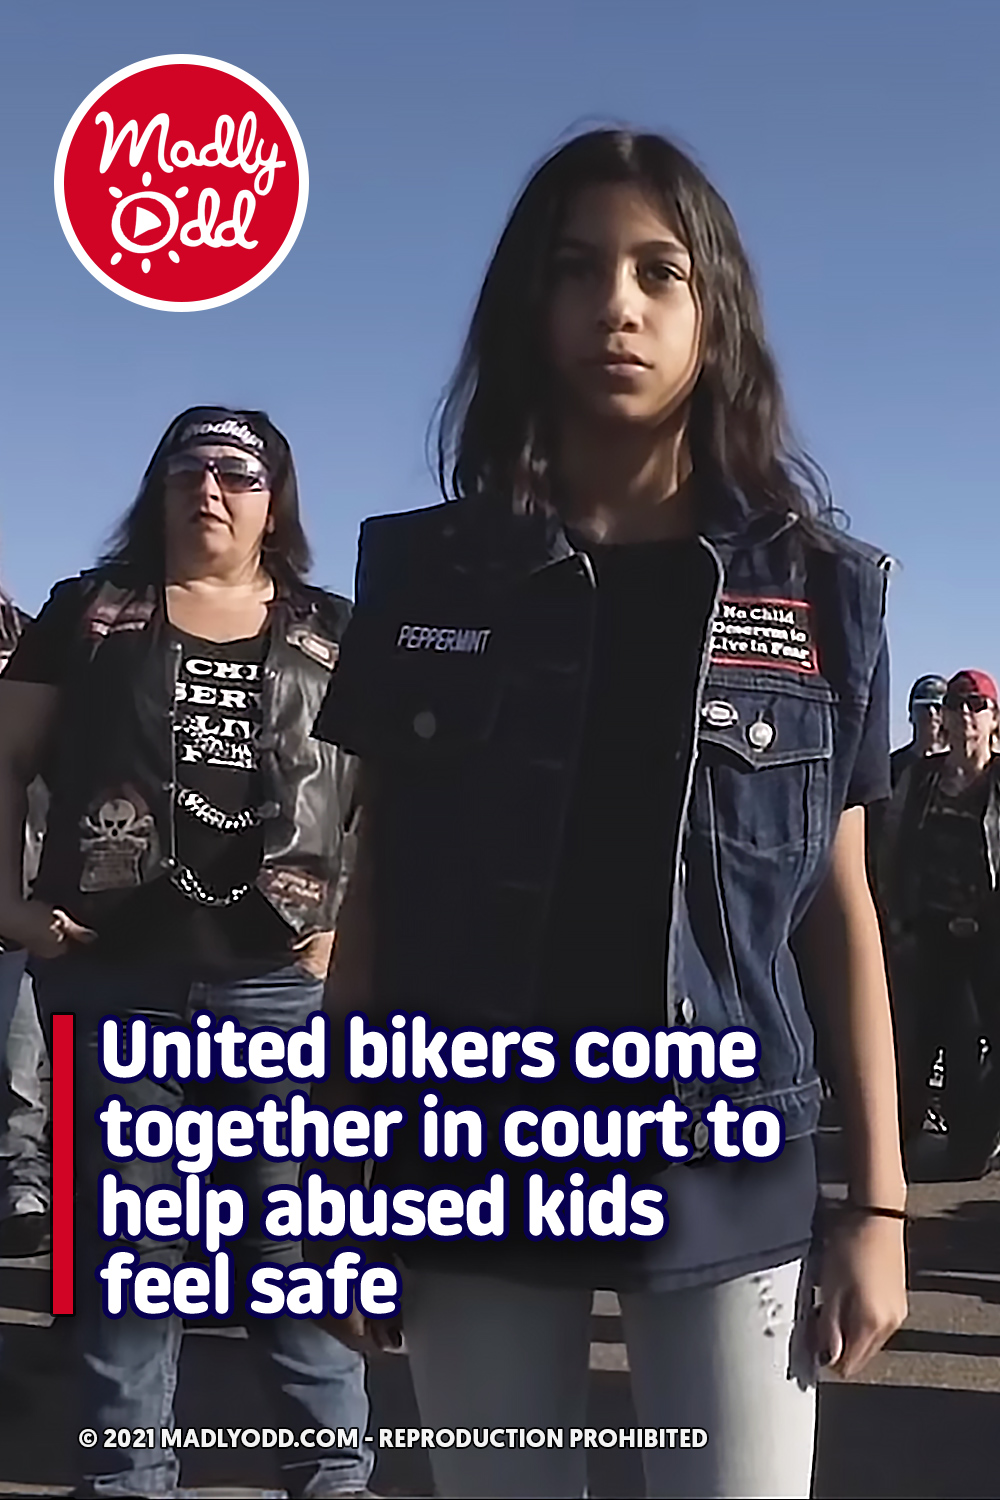 United bikers come together in court to help abused kids feel safe